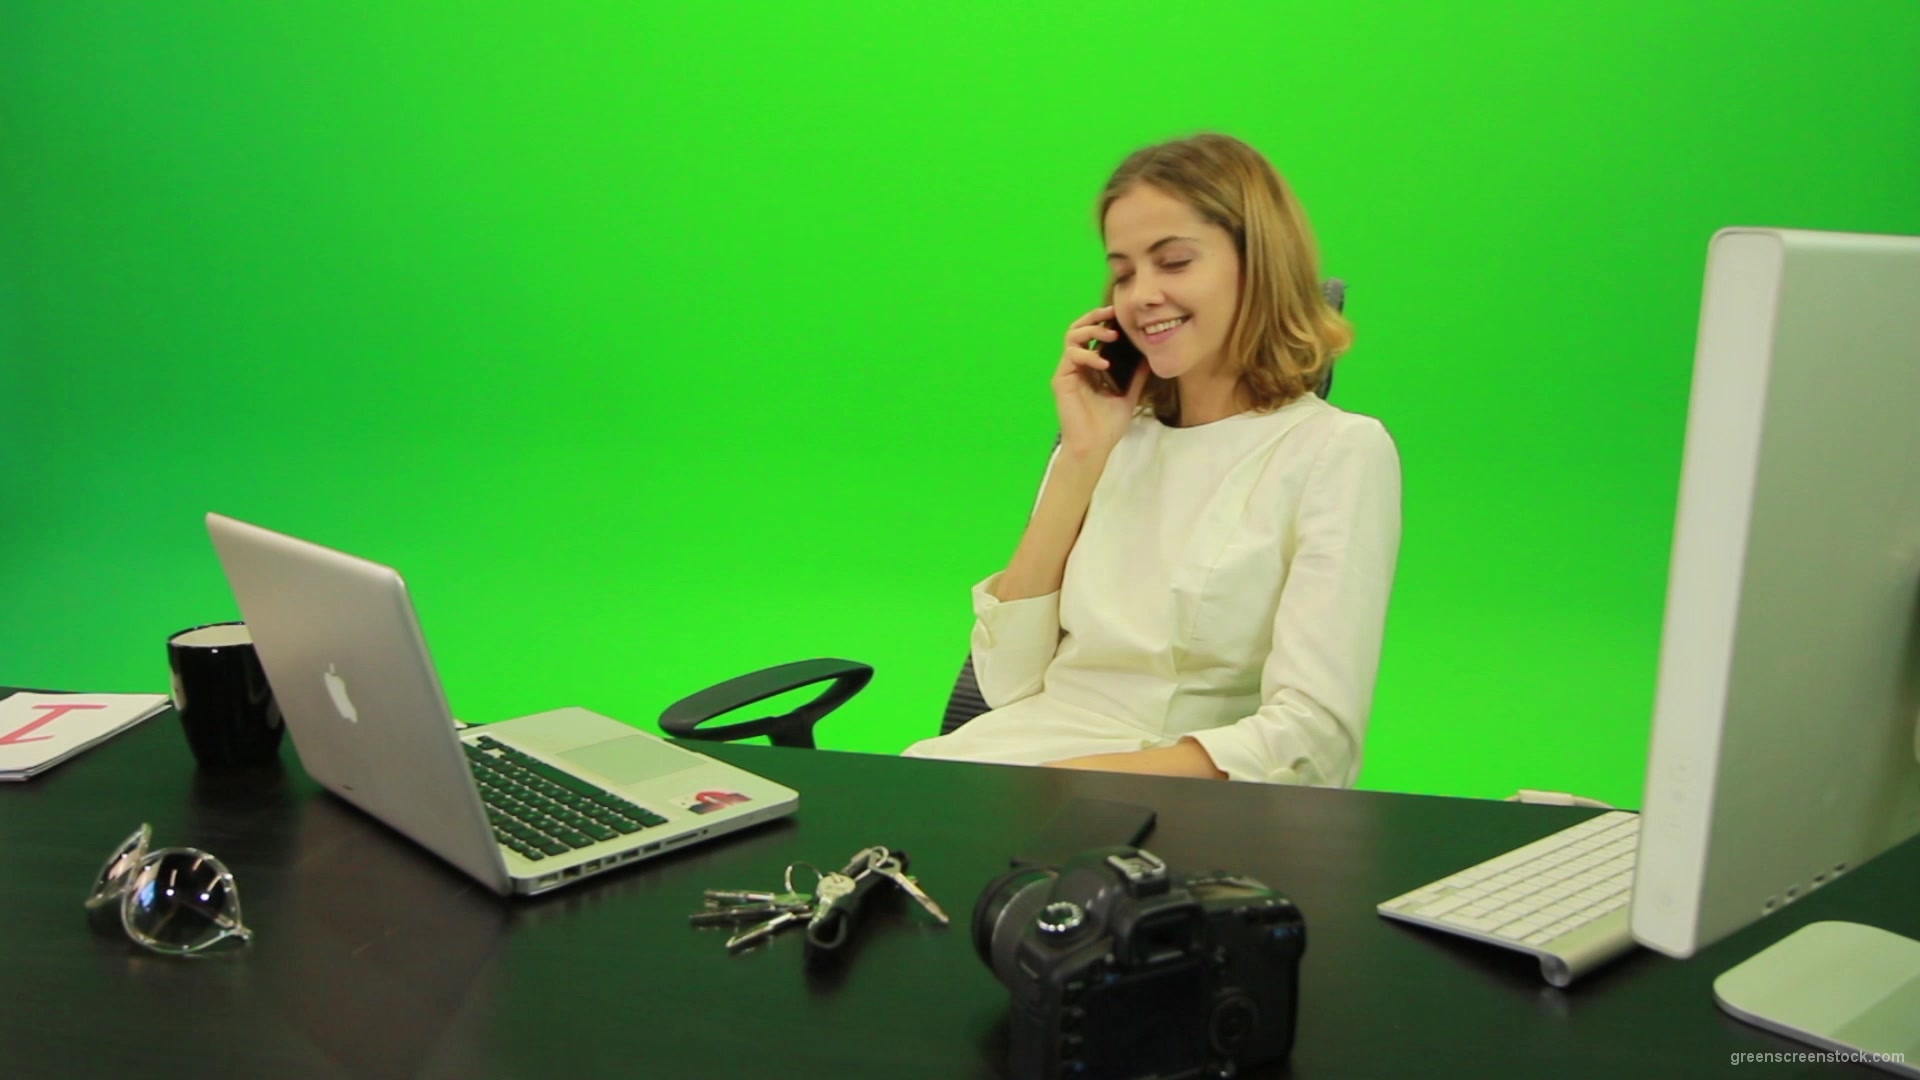 Laughing-Business-Woman-is-Talking-on-the-Phone-Green-Screen-Footage_006 Green Screen Stock